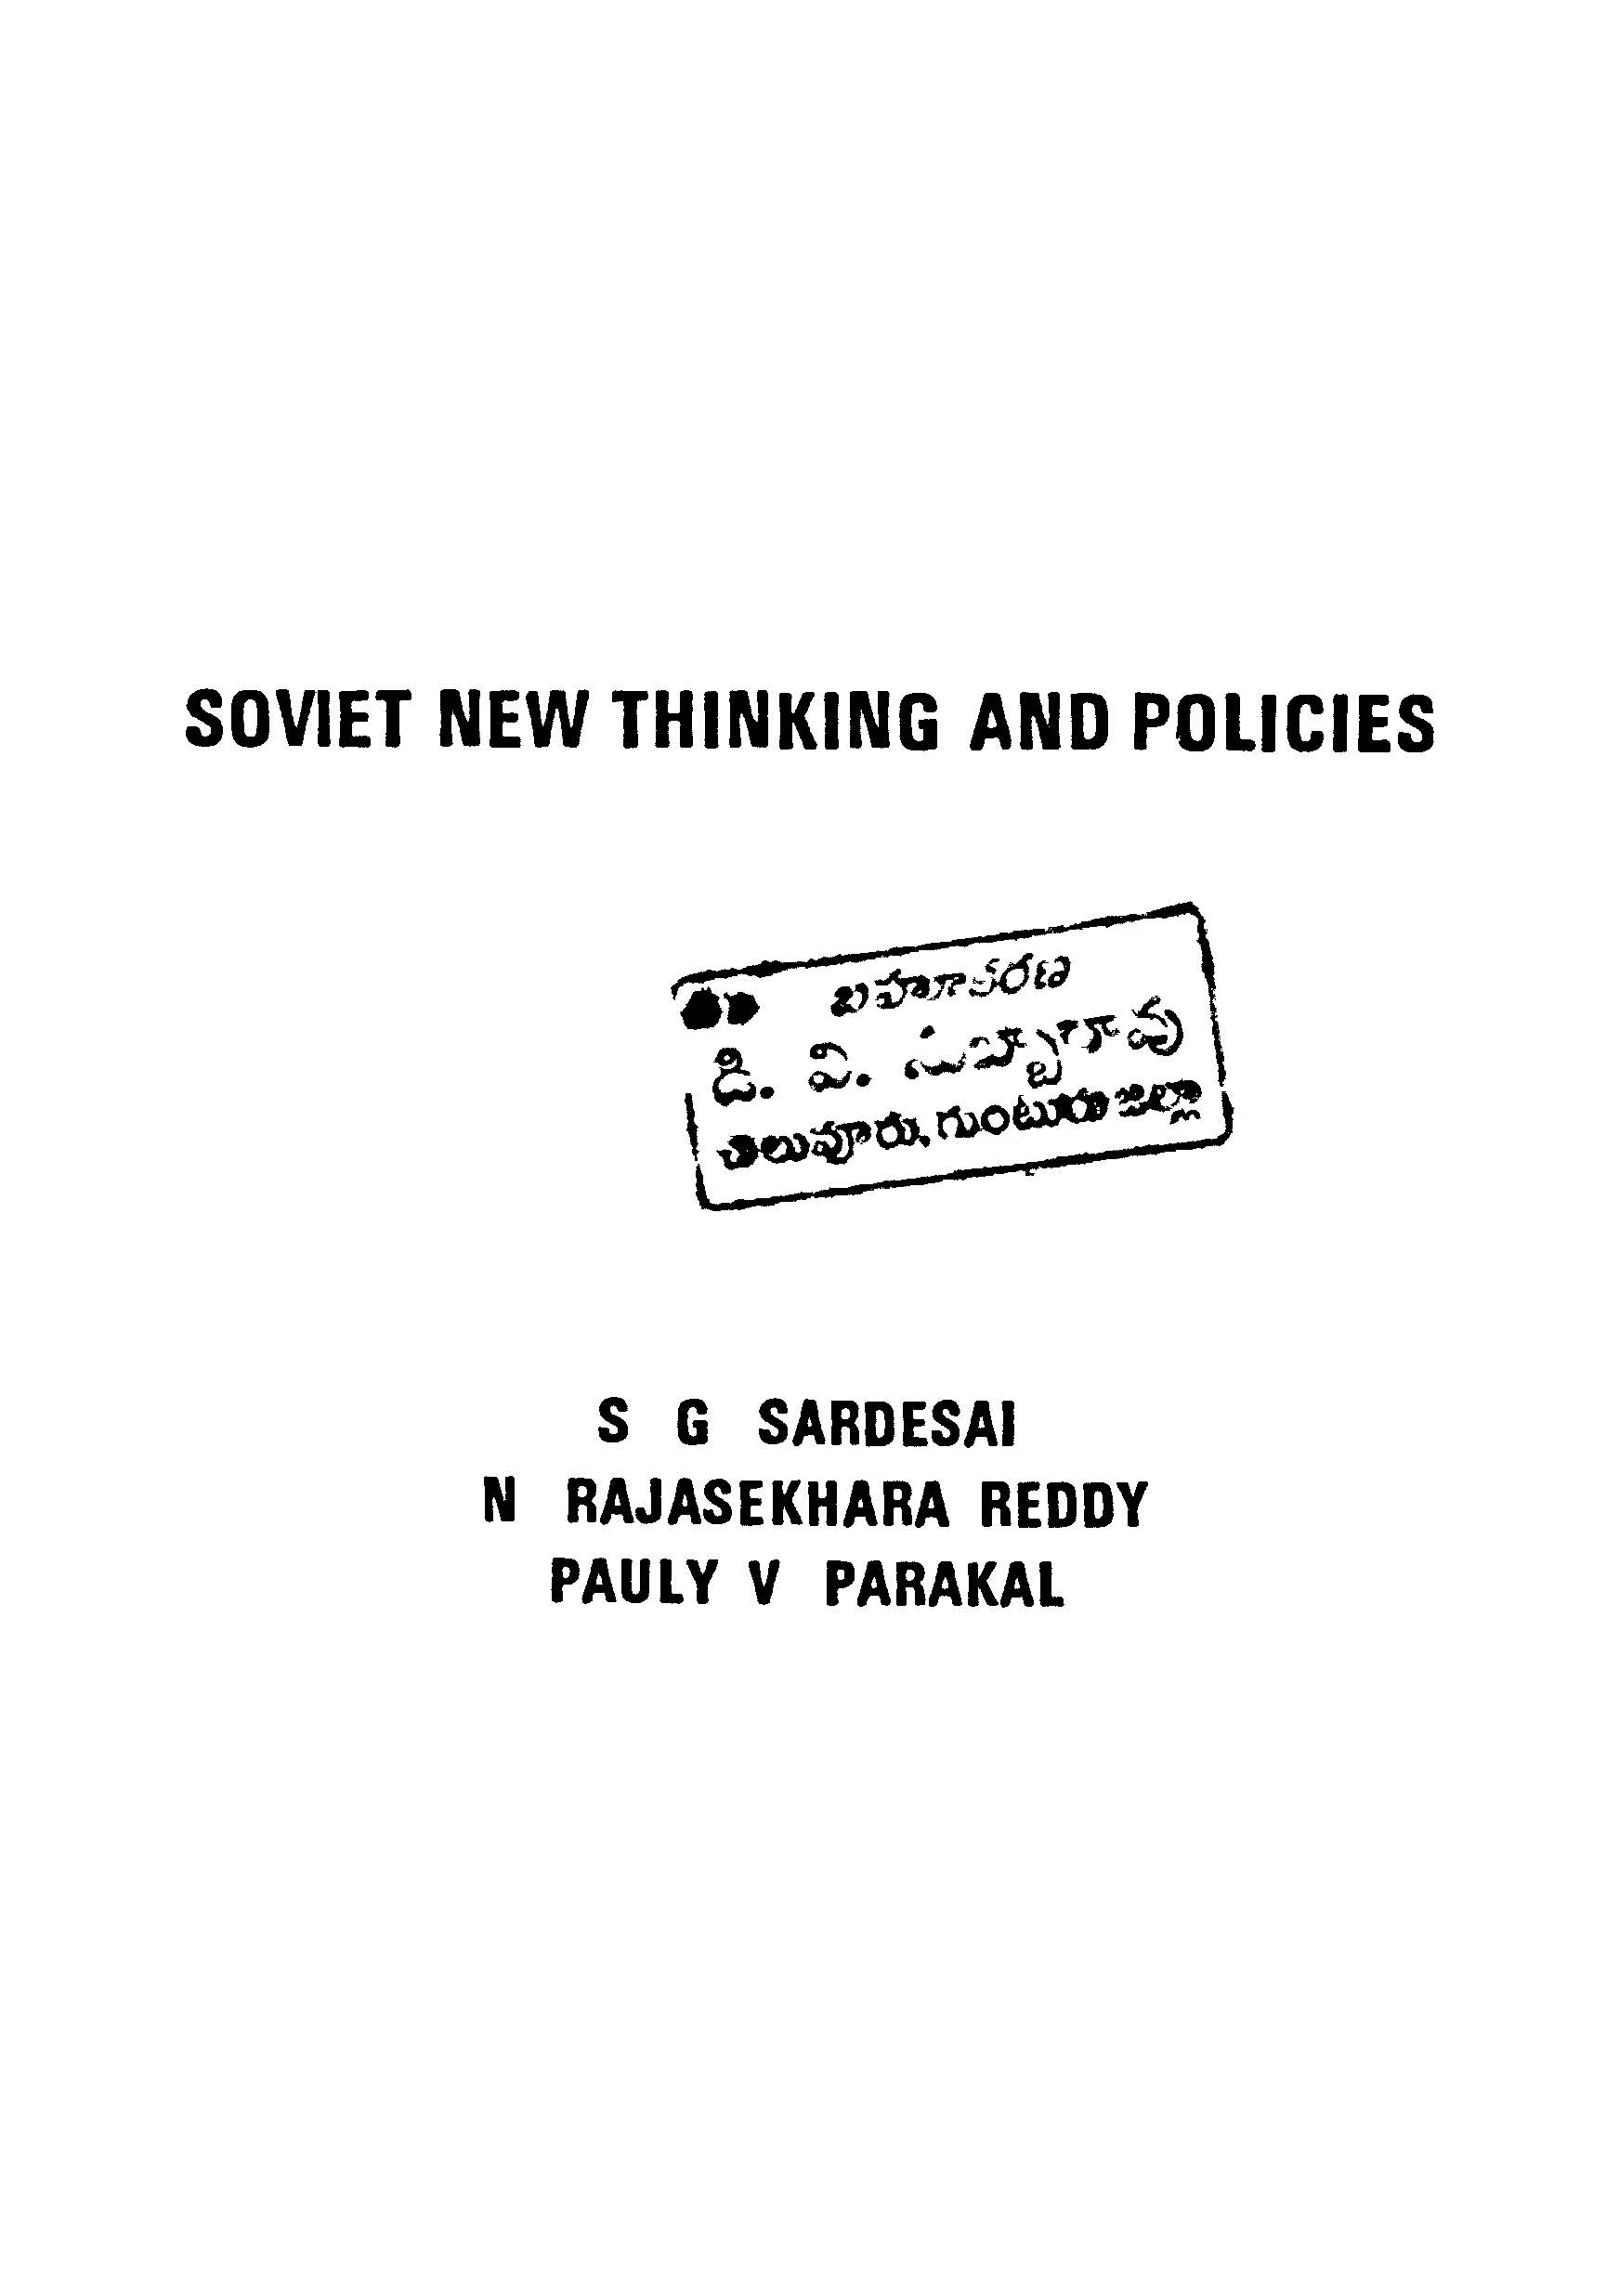 Soviet New Thinking And Policies